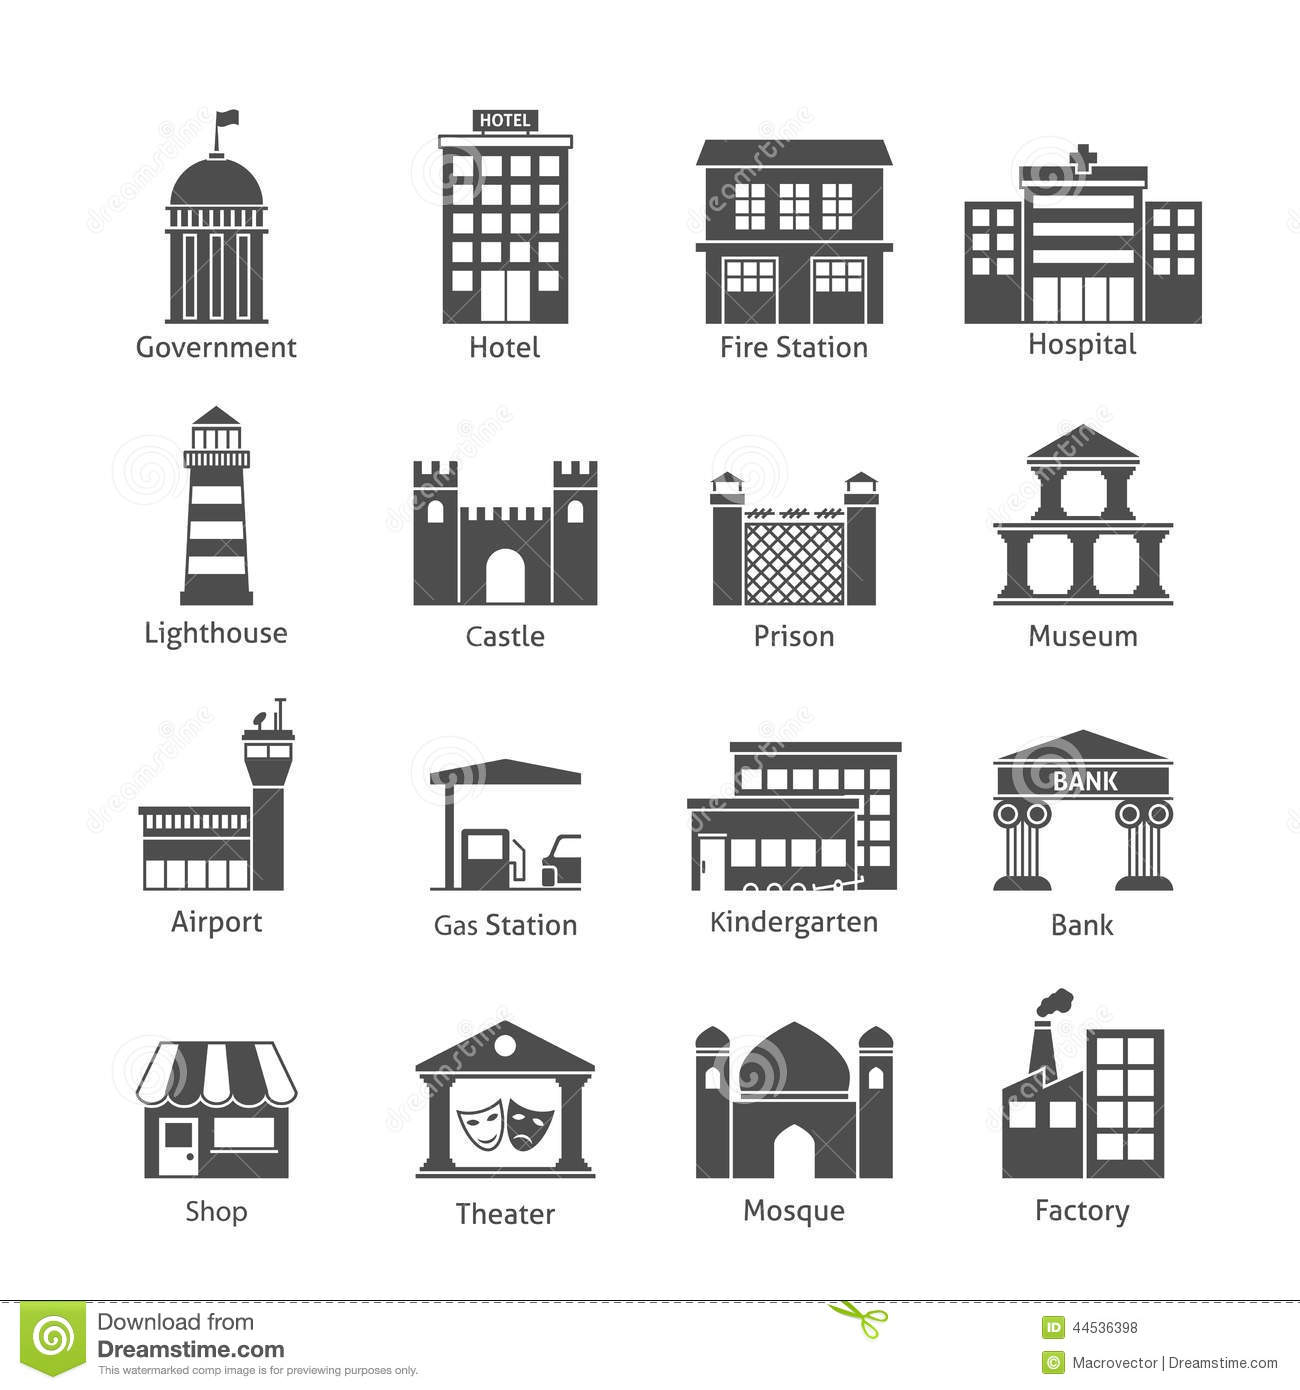 Government Building Icon Vector Free